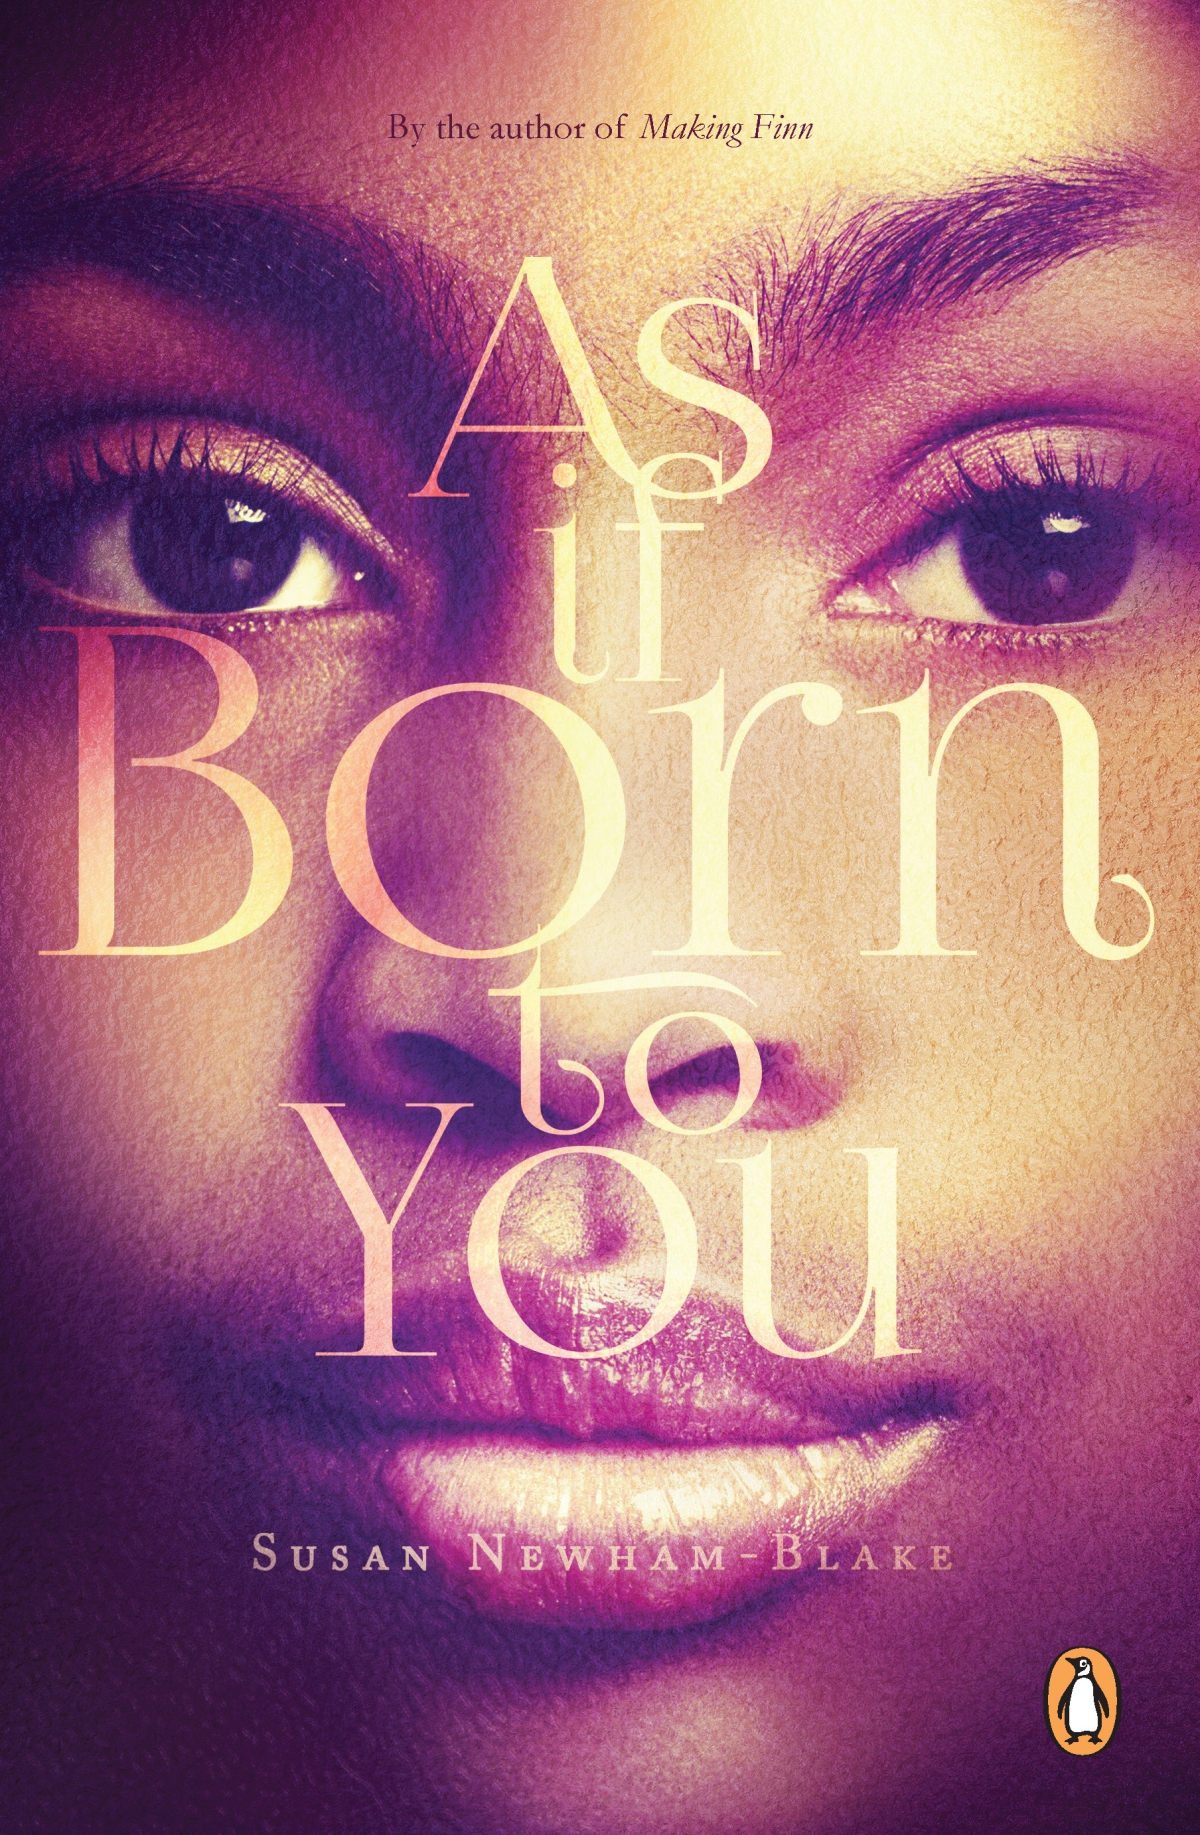 As If Born to You